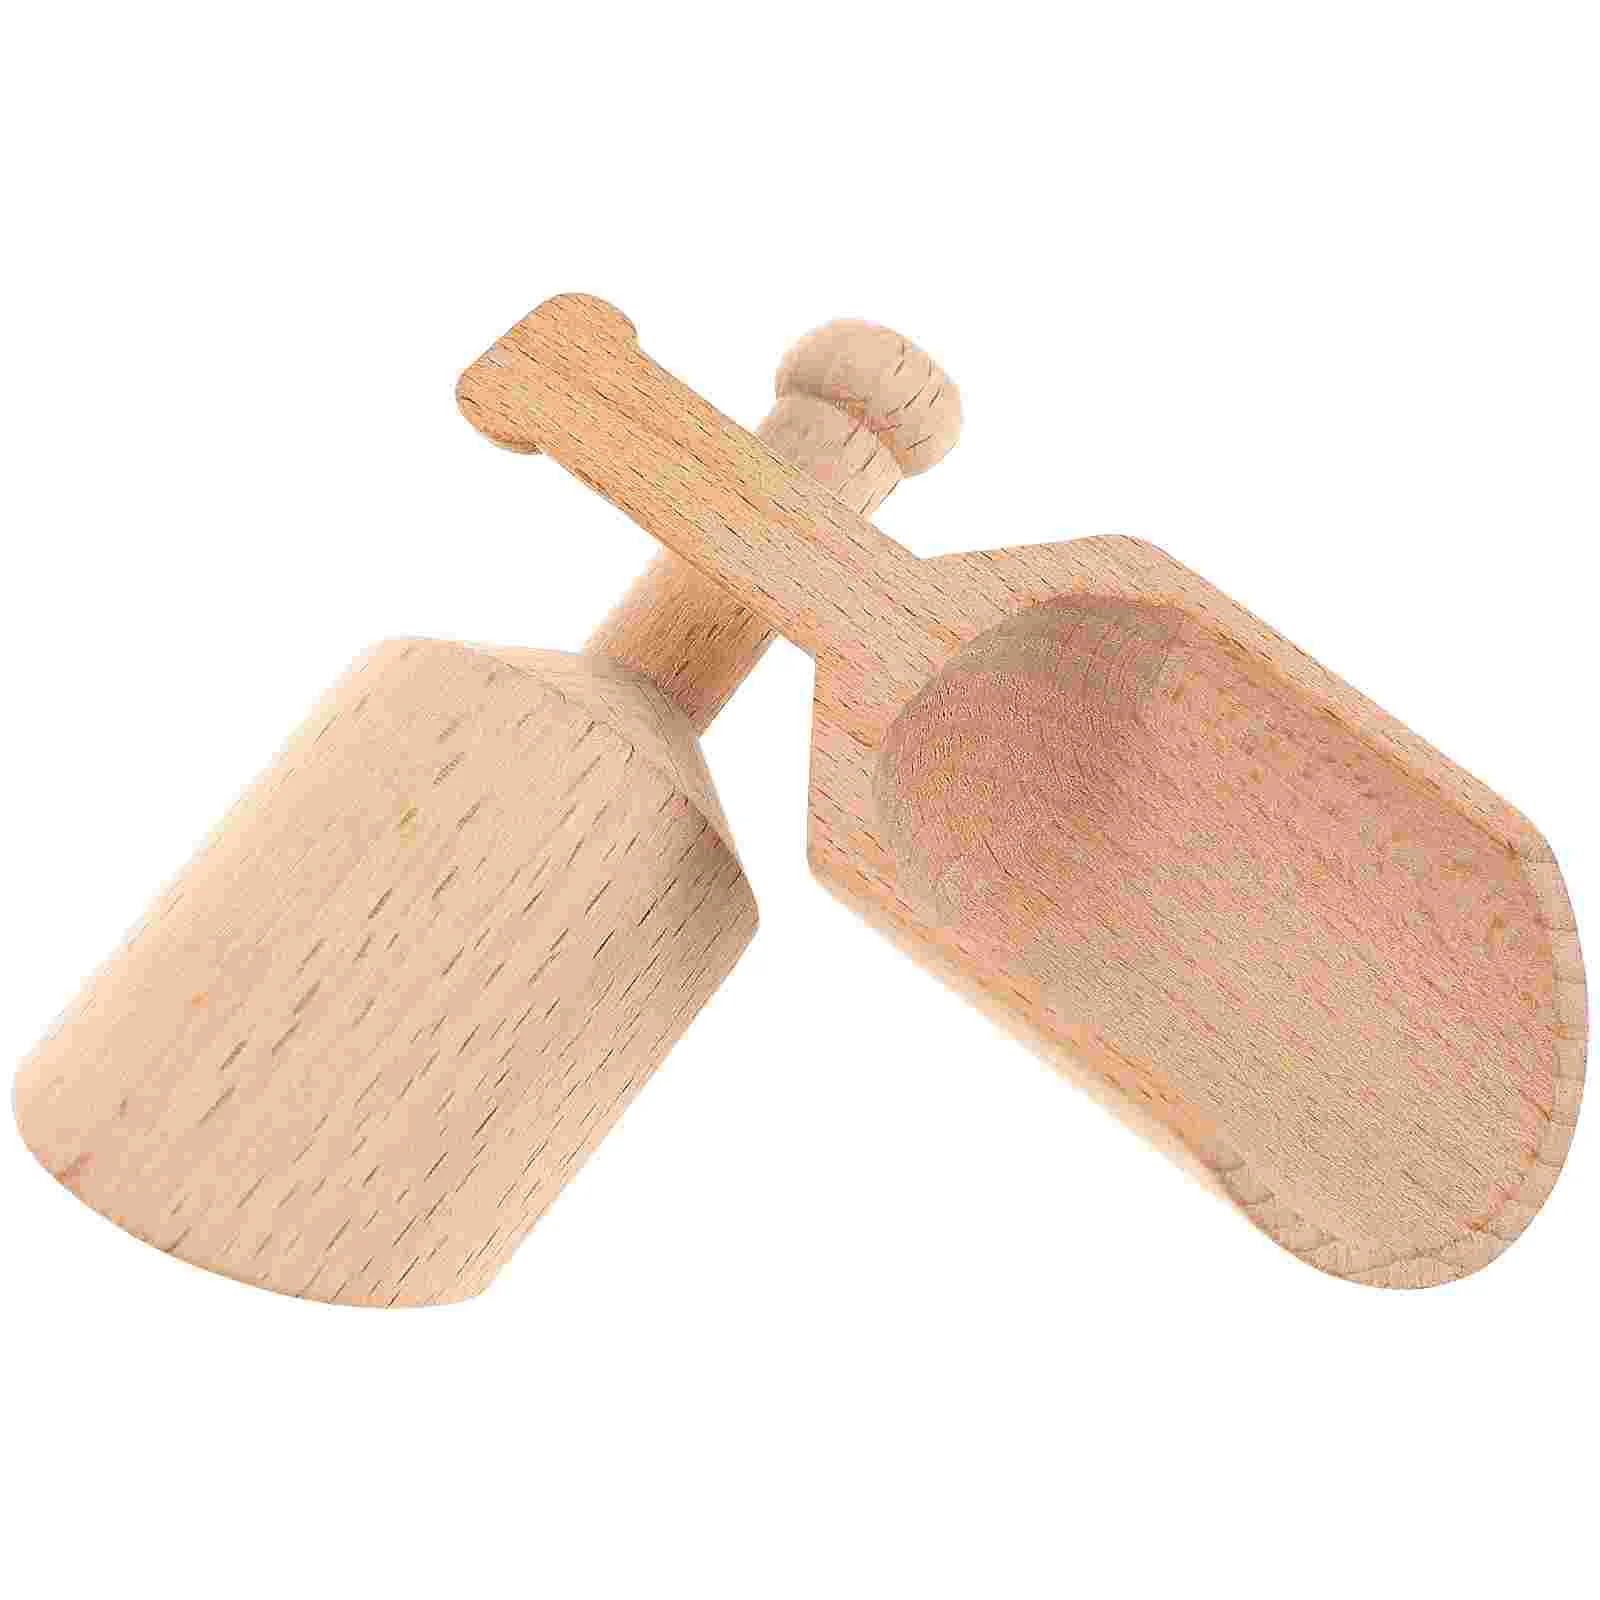 

2 Pcs Household Practical Useful Lightweight Nature Kitchen Spoons Condiments Wooden Spoons Bath Salt Spoons